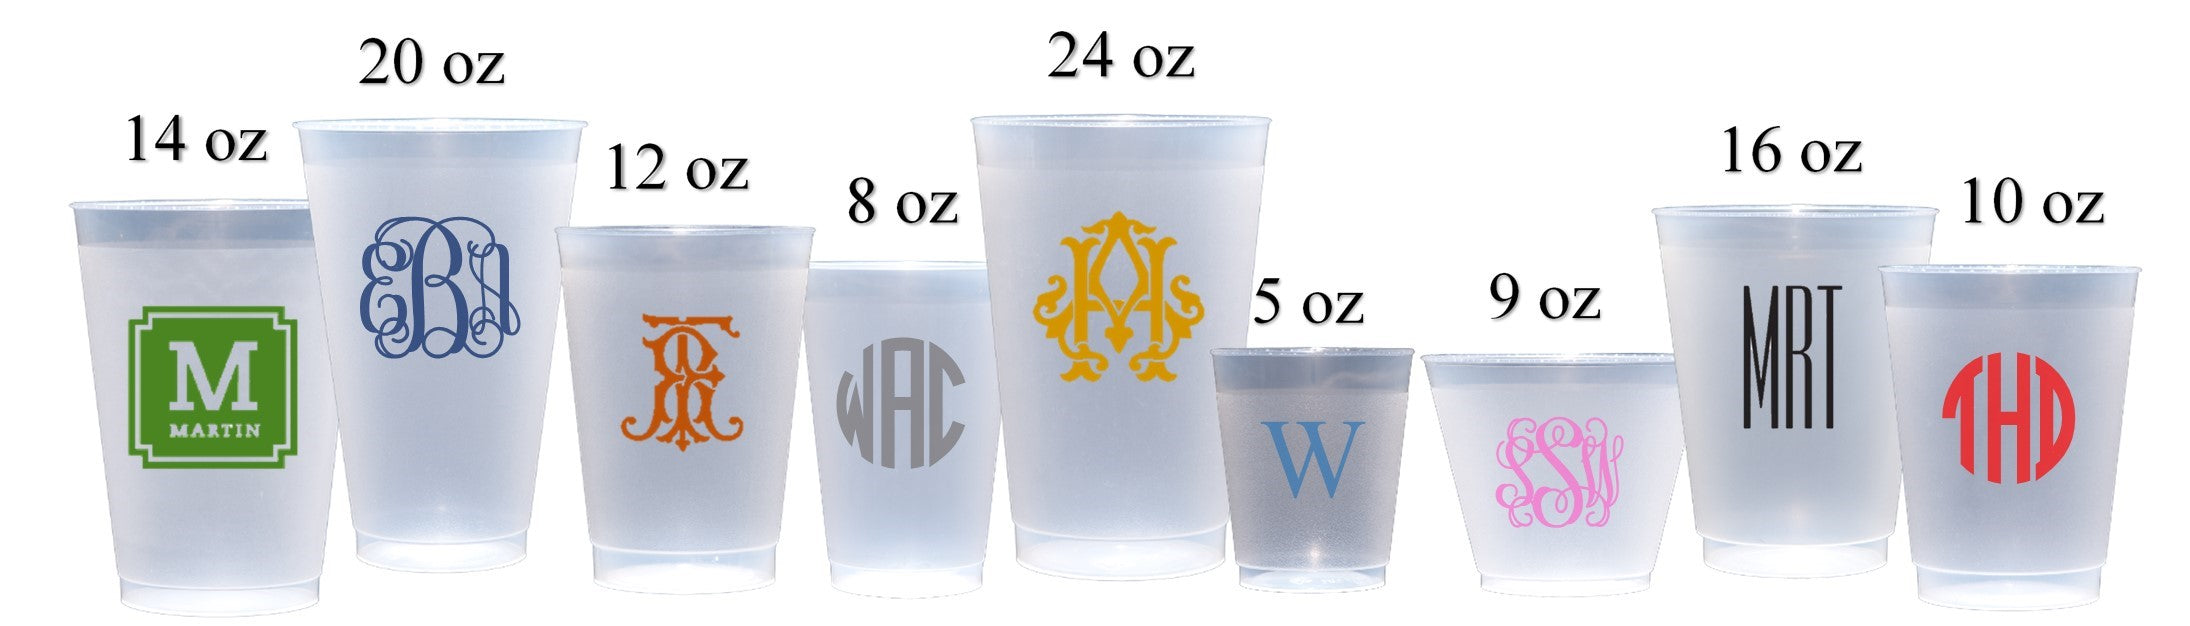 Fancy Plastic Party Cups, 16 oz Frosted Cups